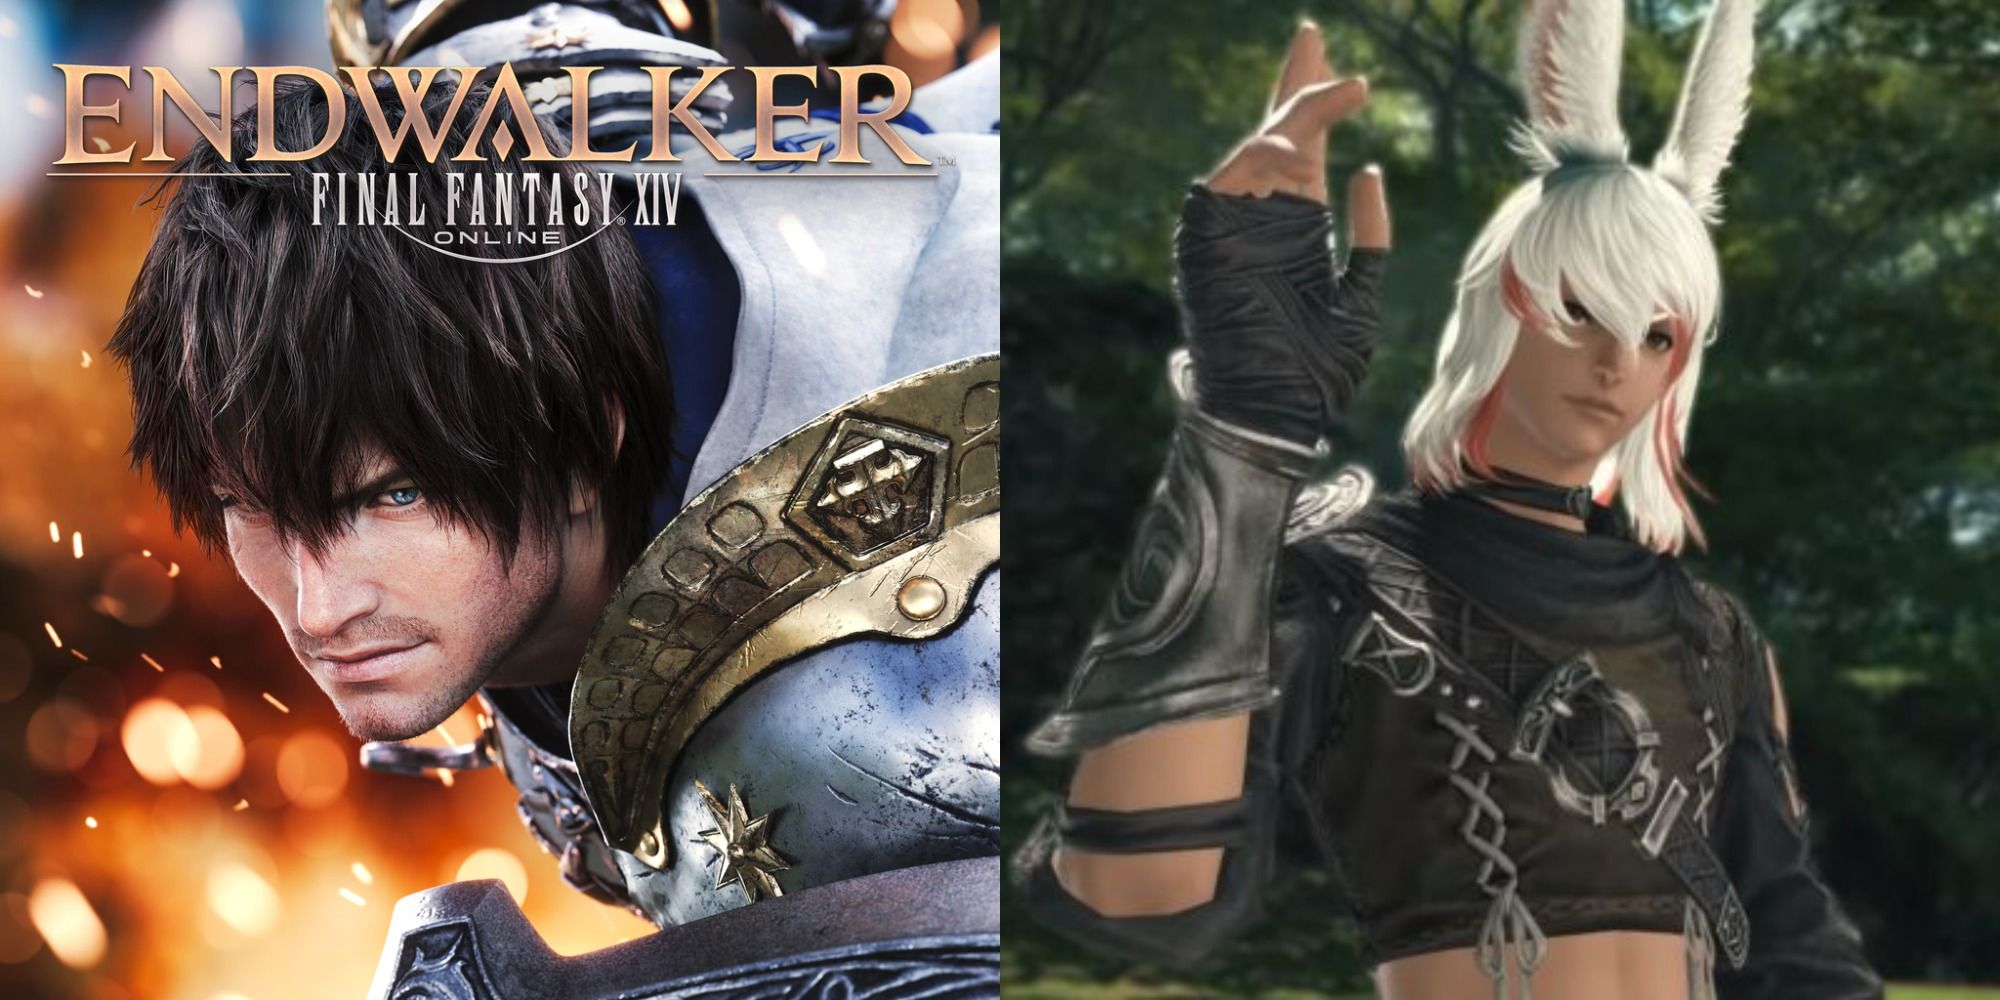 Split image showing the cover for Final Fantasy XIV Endwalker and Male Viera